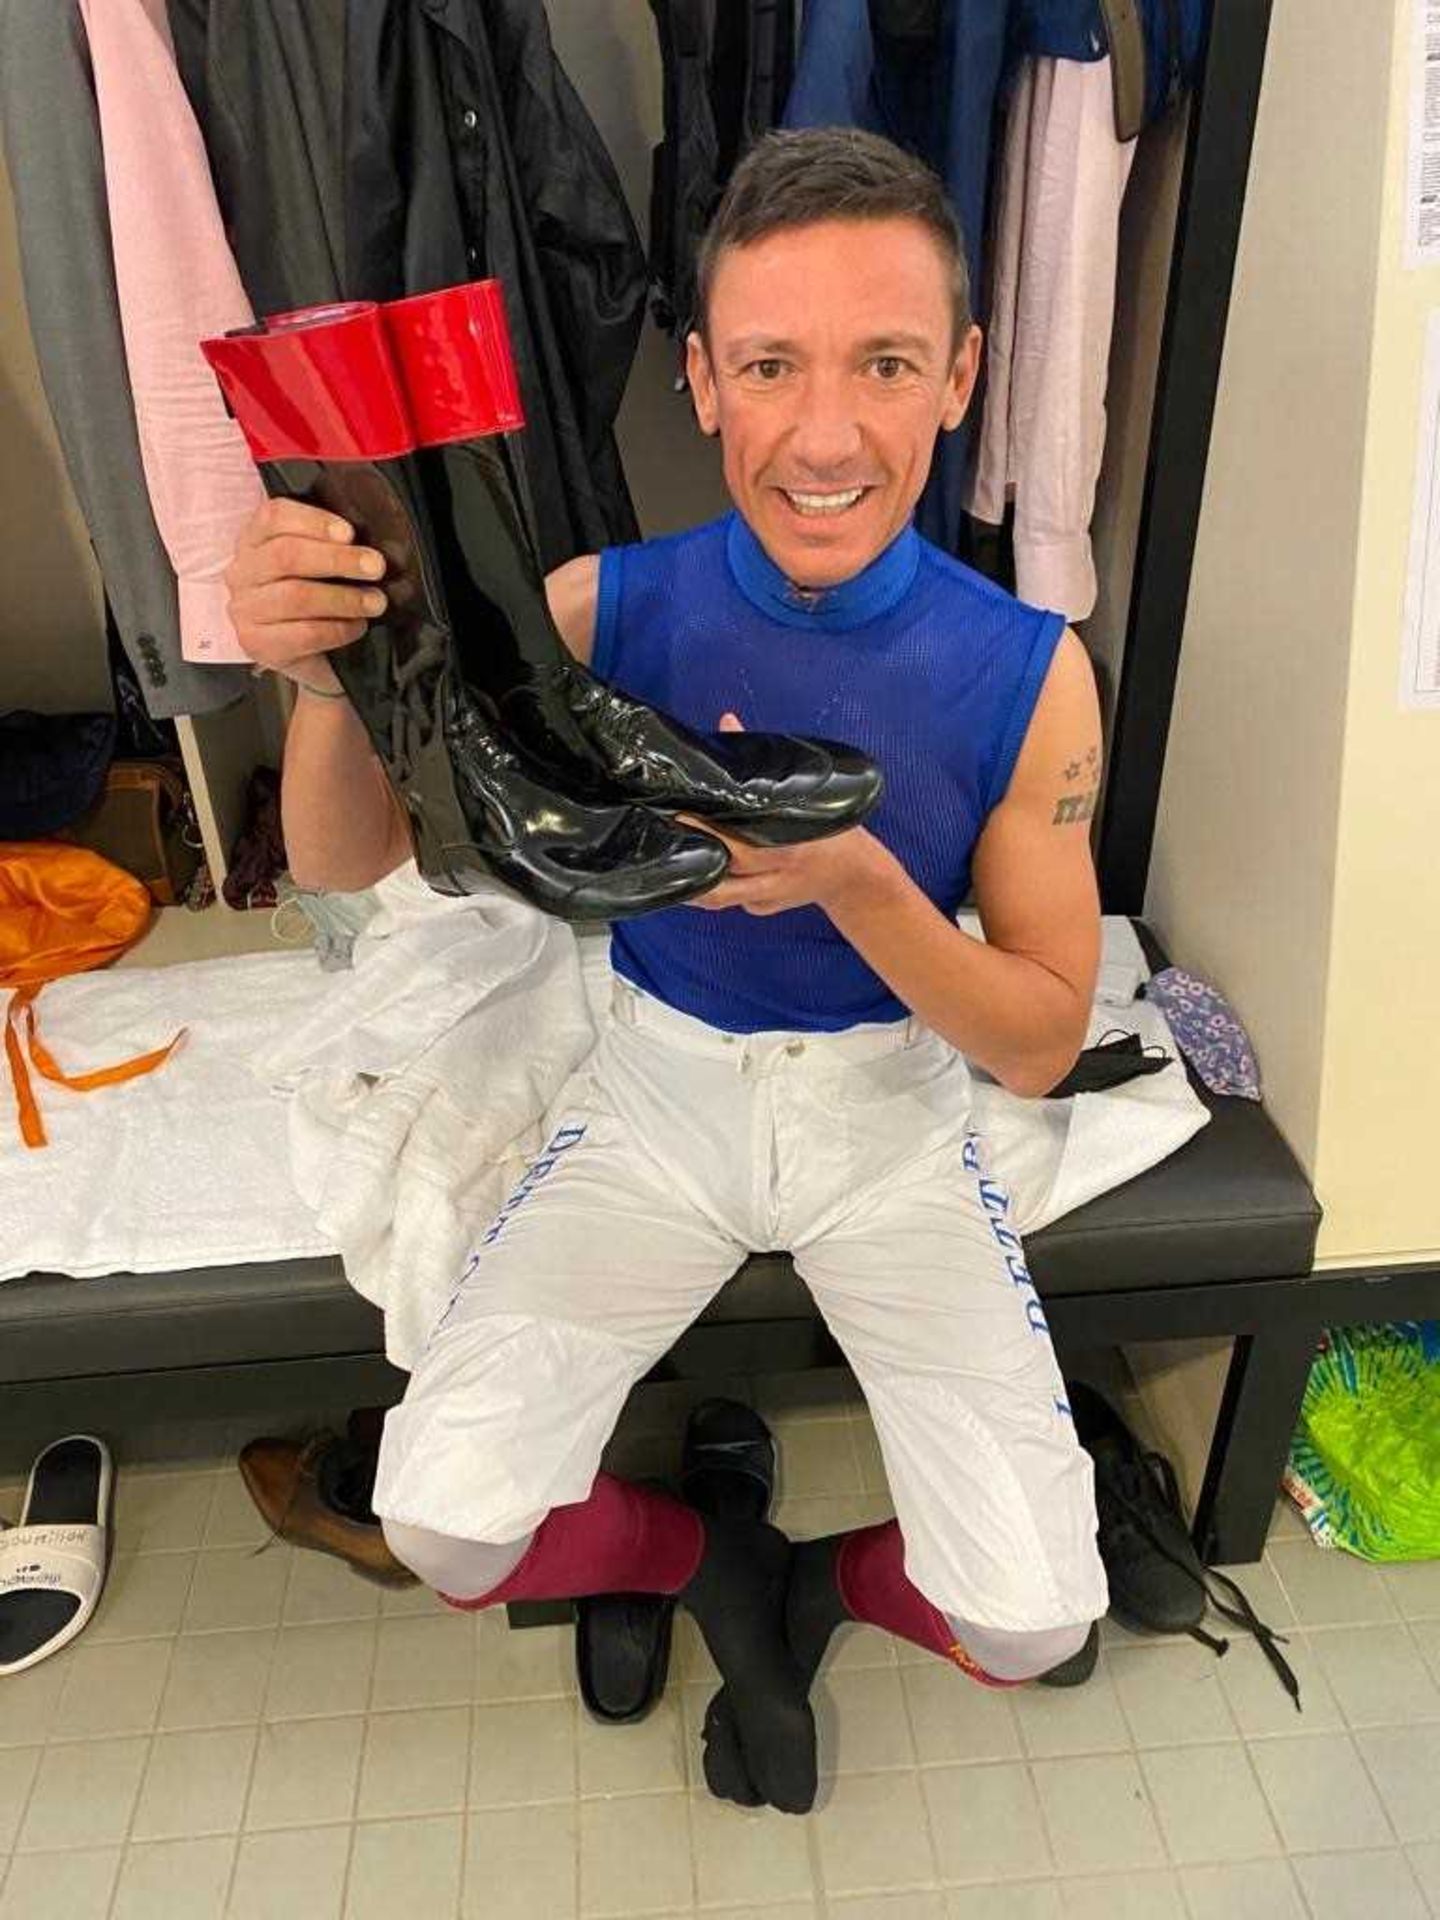 Signed Frankie Dettori MBE Riding Boots, Worn in the Historic King George VI Race at Ascot in 2020